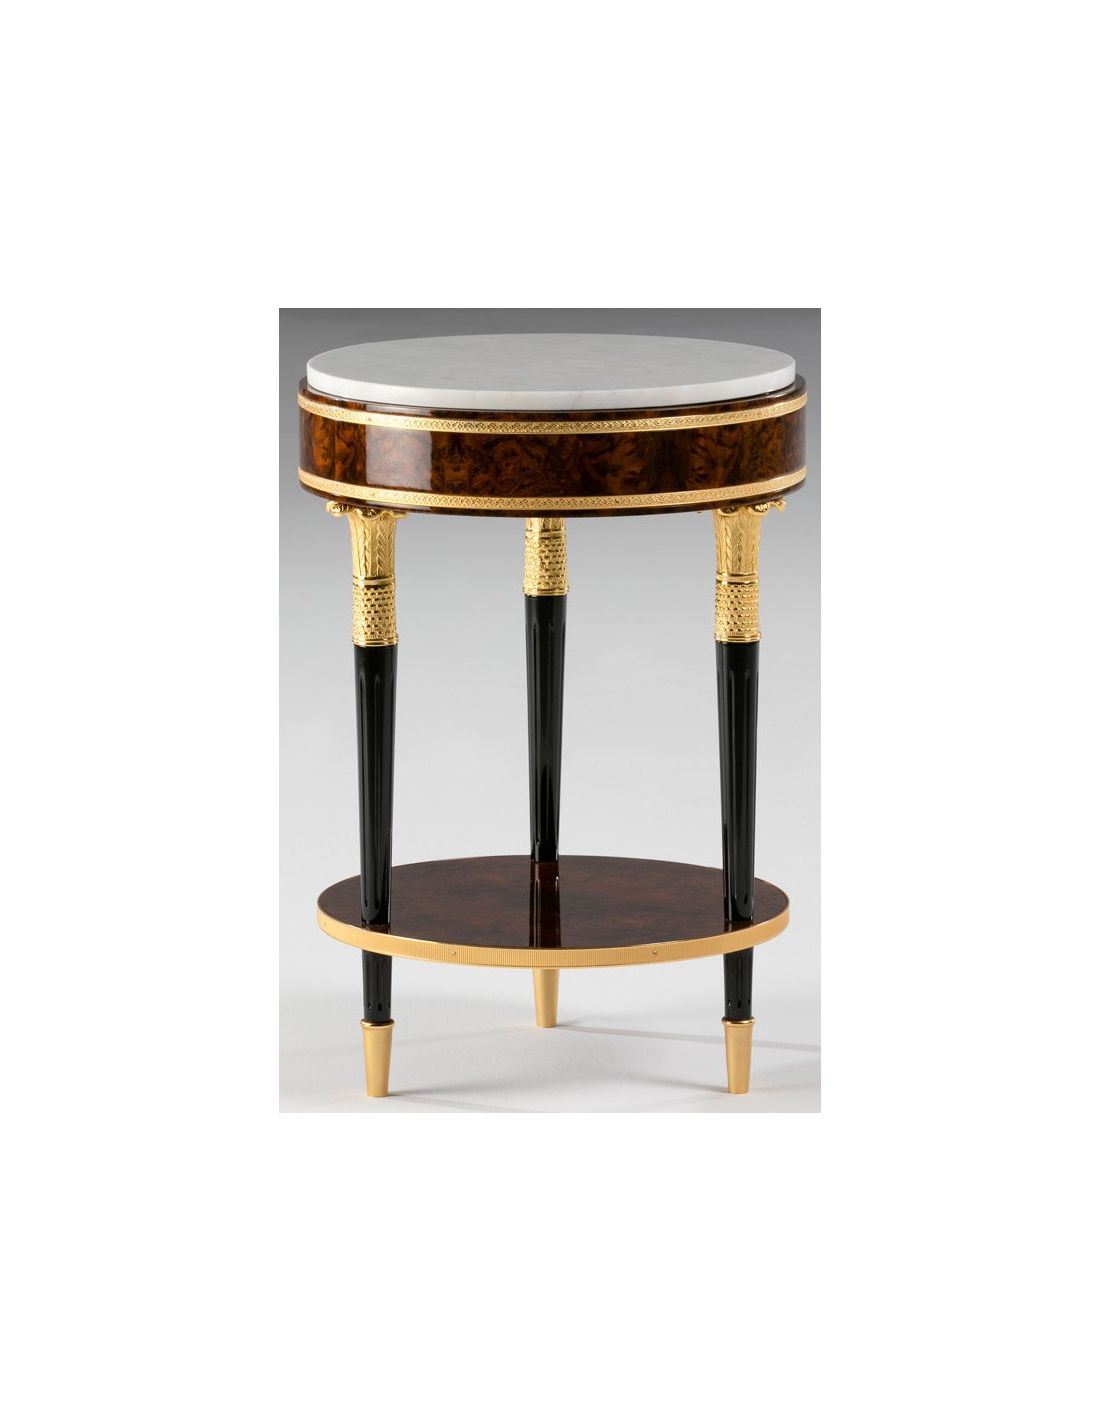 WESTERLY COLLECTION. SIDE TABLE